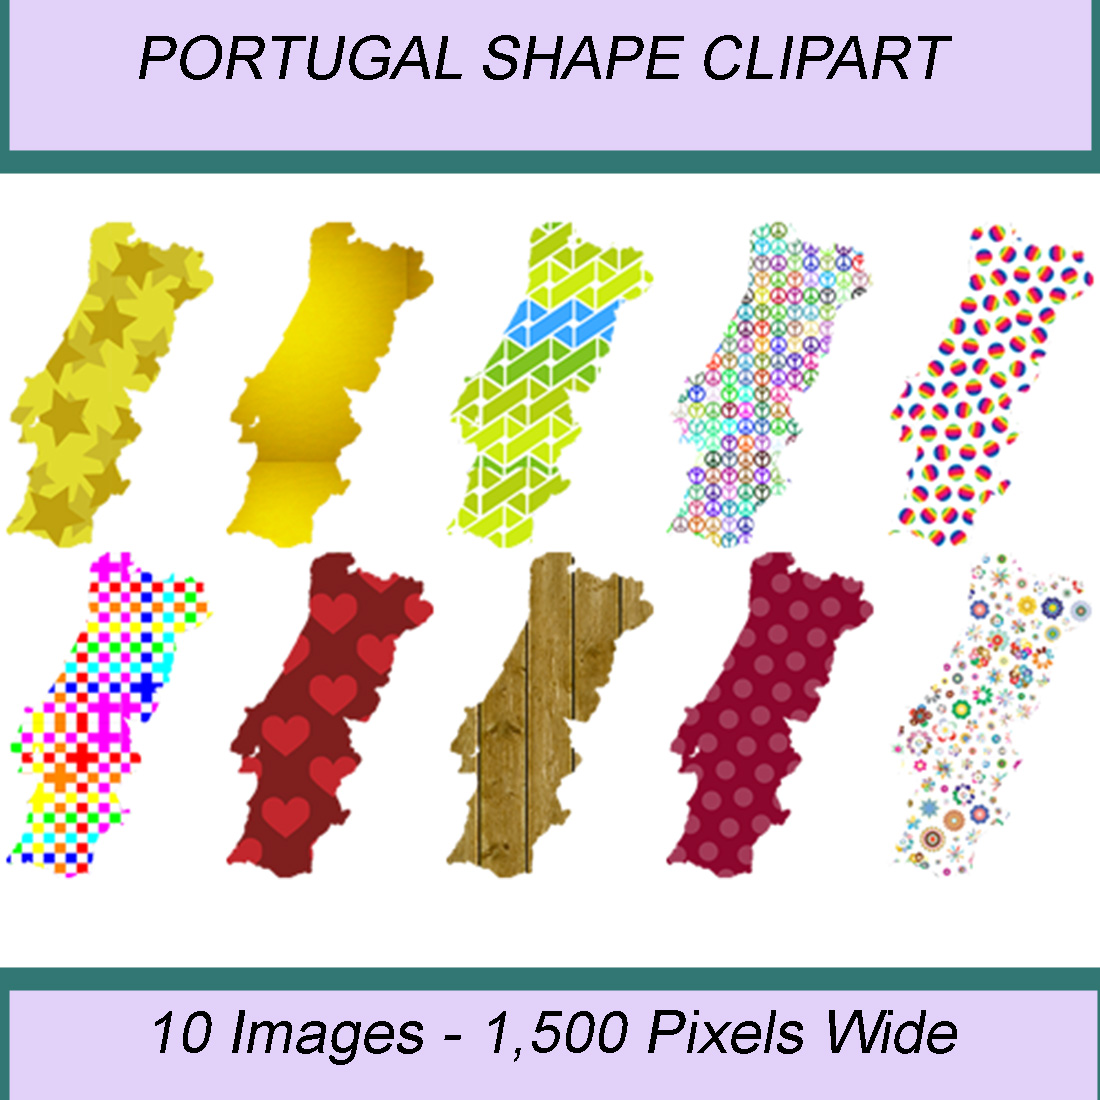 PORTUGAL SHAPE CLIPART ICONS cover image.